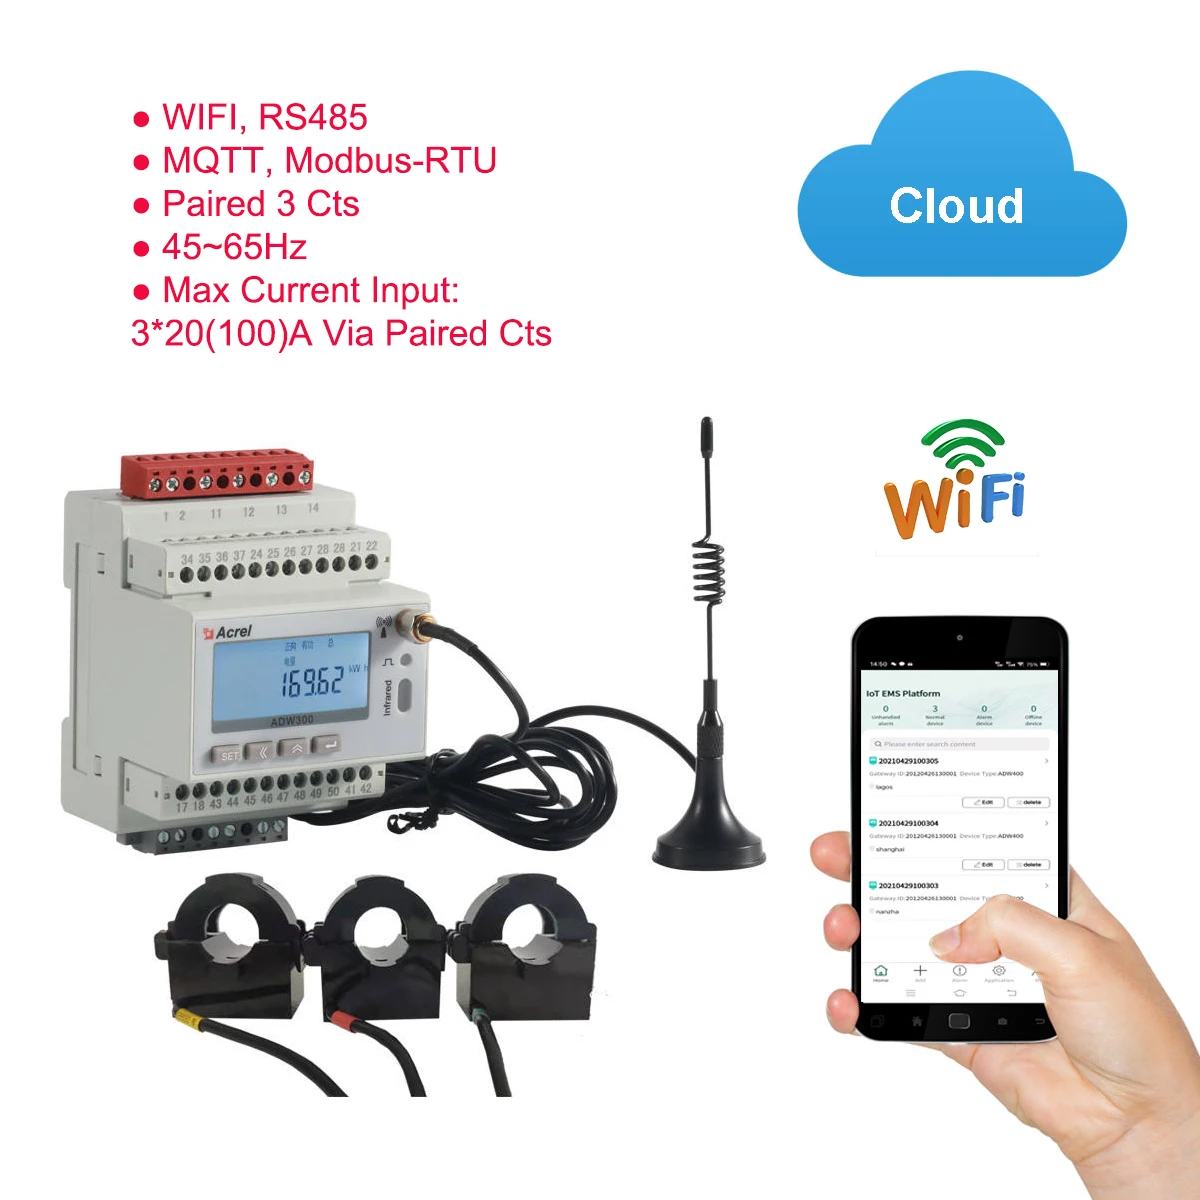 

Rs485 Modbus-RTU MQTT Protocol 3 Phase Iot Wireless Electricity Energy Meter Wifi Communication with 3*20(100)A Split Core Cts